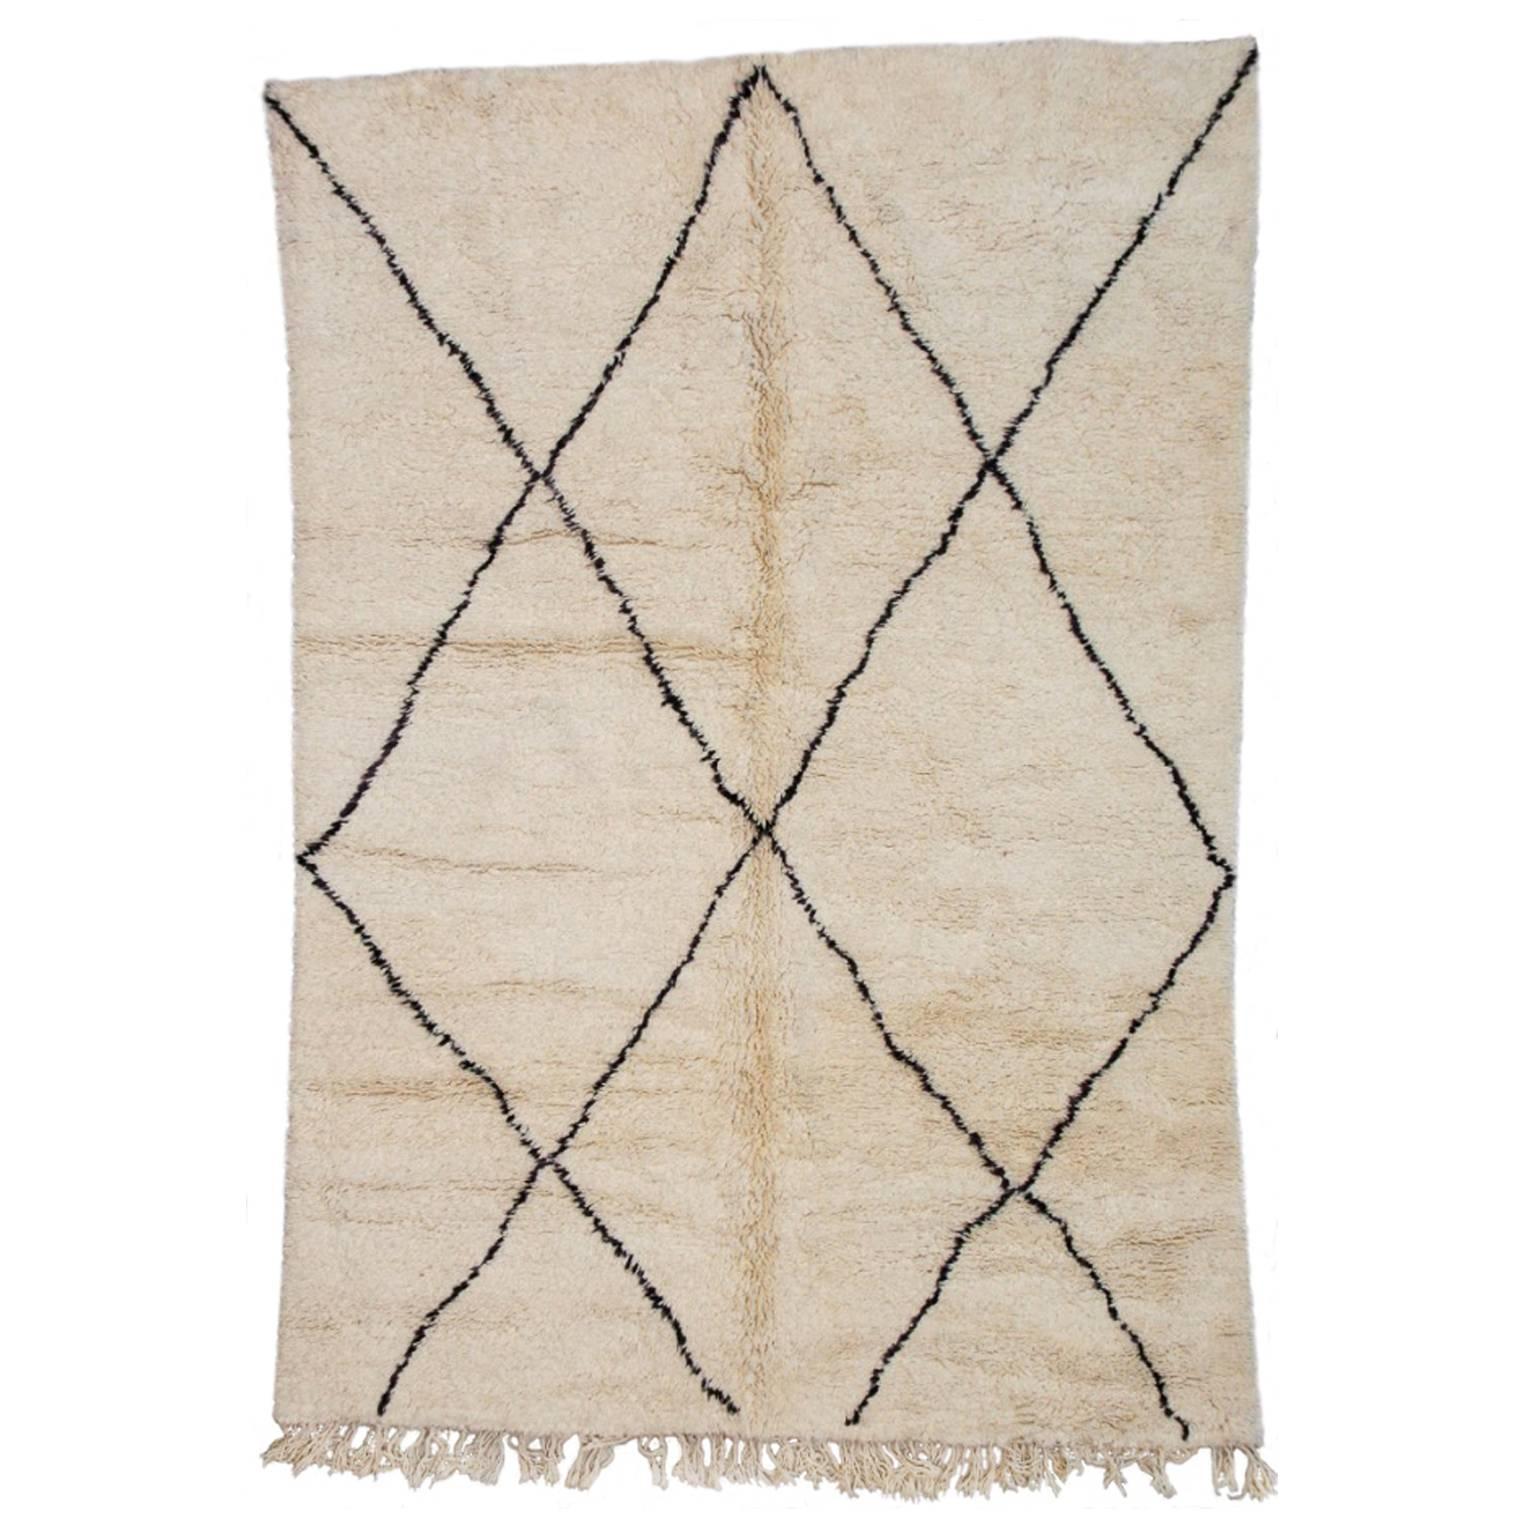 Beni Ourain Moroccan Rug with Large X-Pattern